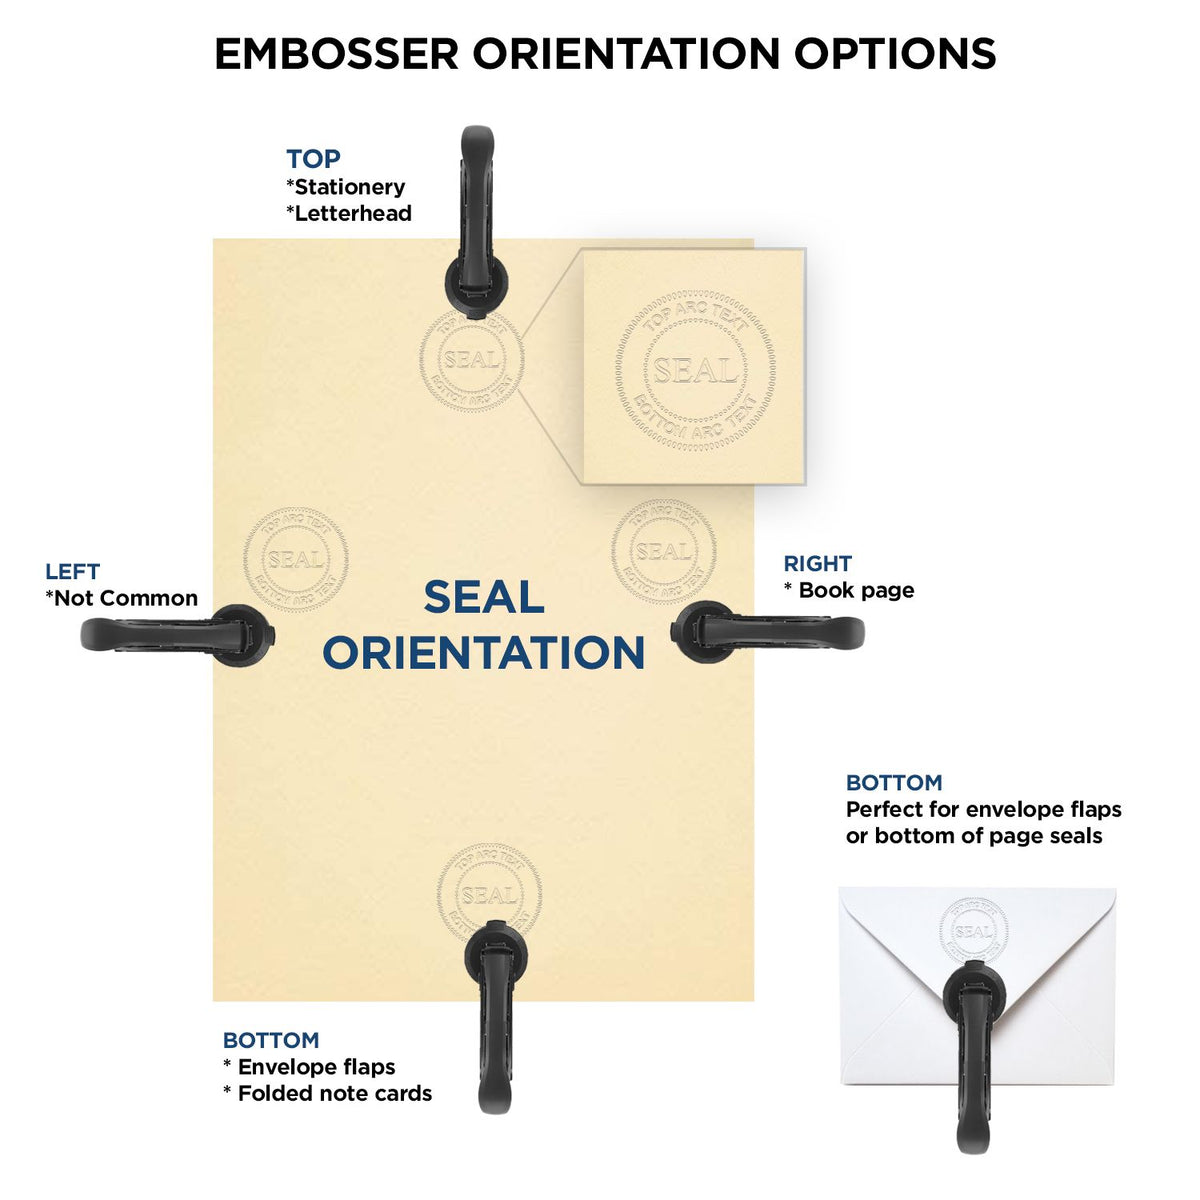 An infographic for the State of Nebraska Long Reach Architectural Embossing Seal showing embosser orientation, this is showing examples of a top, bottom, right and left insert.